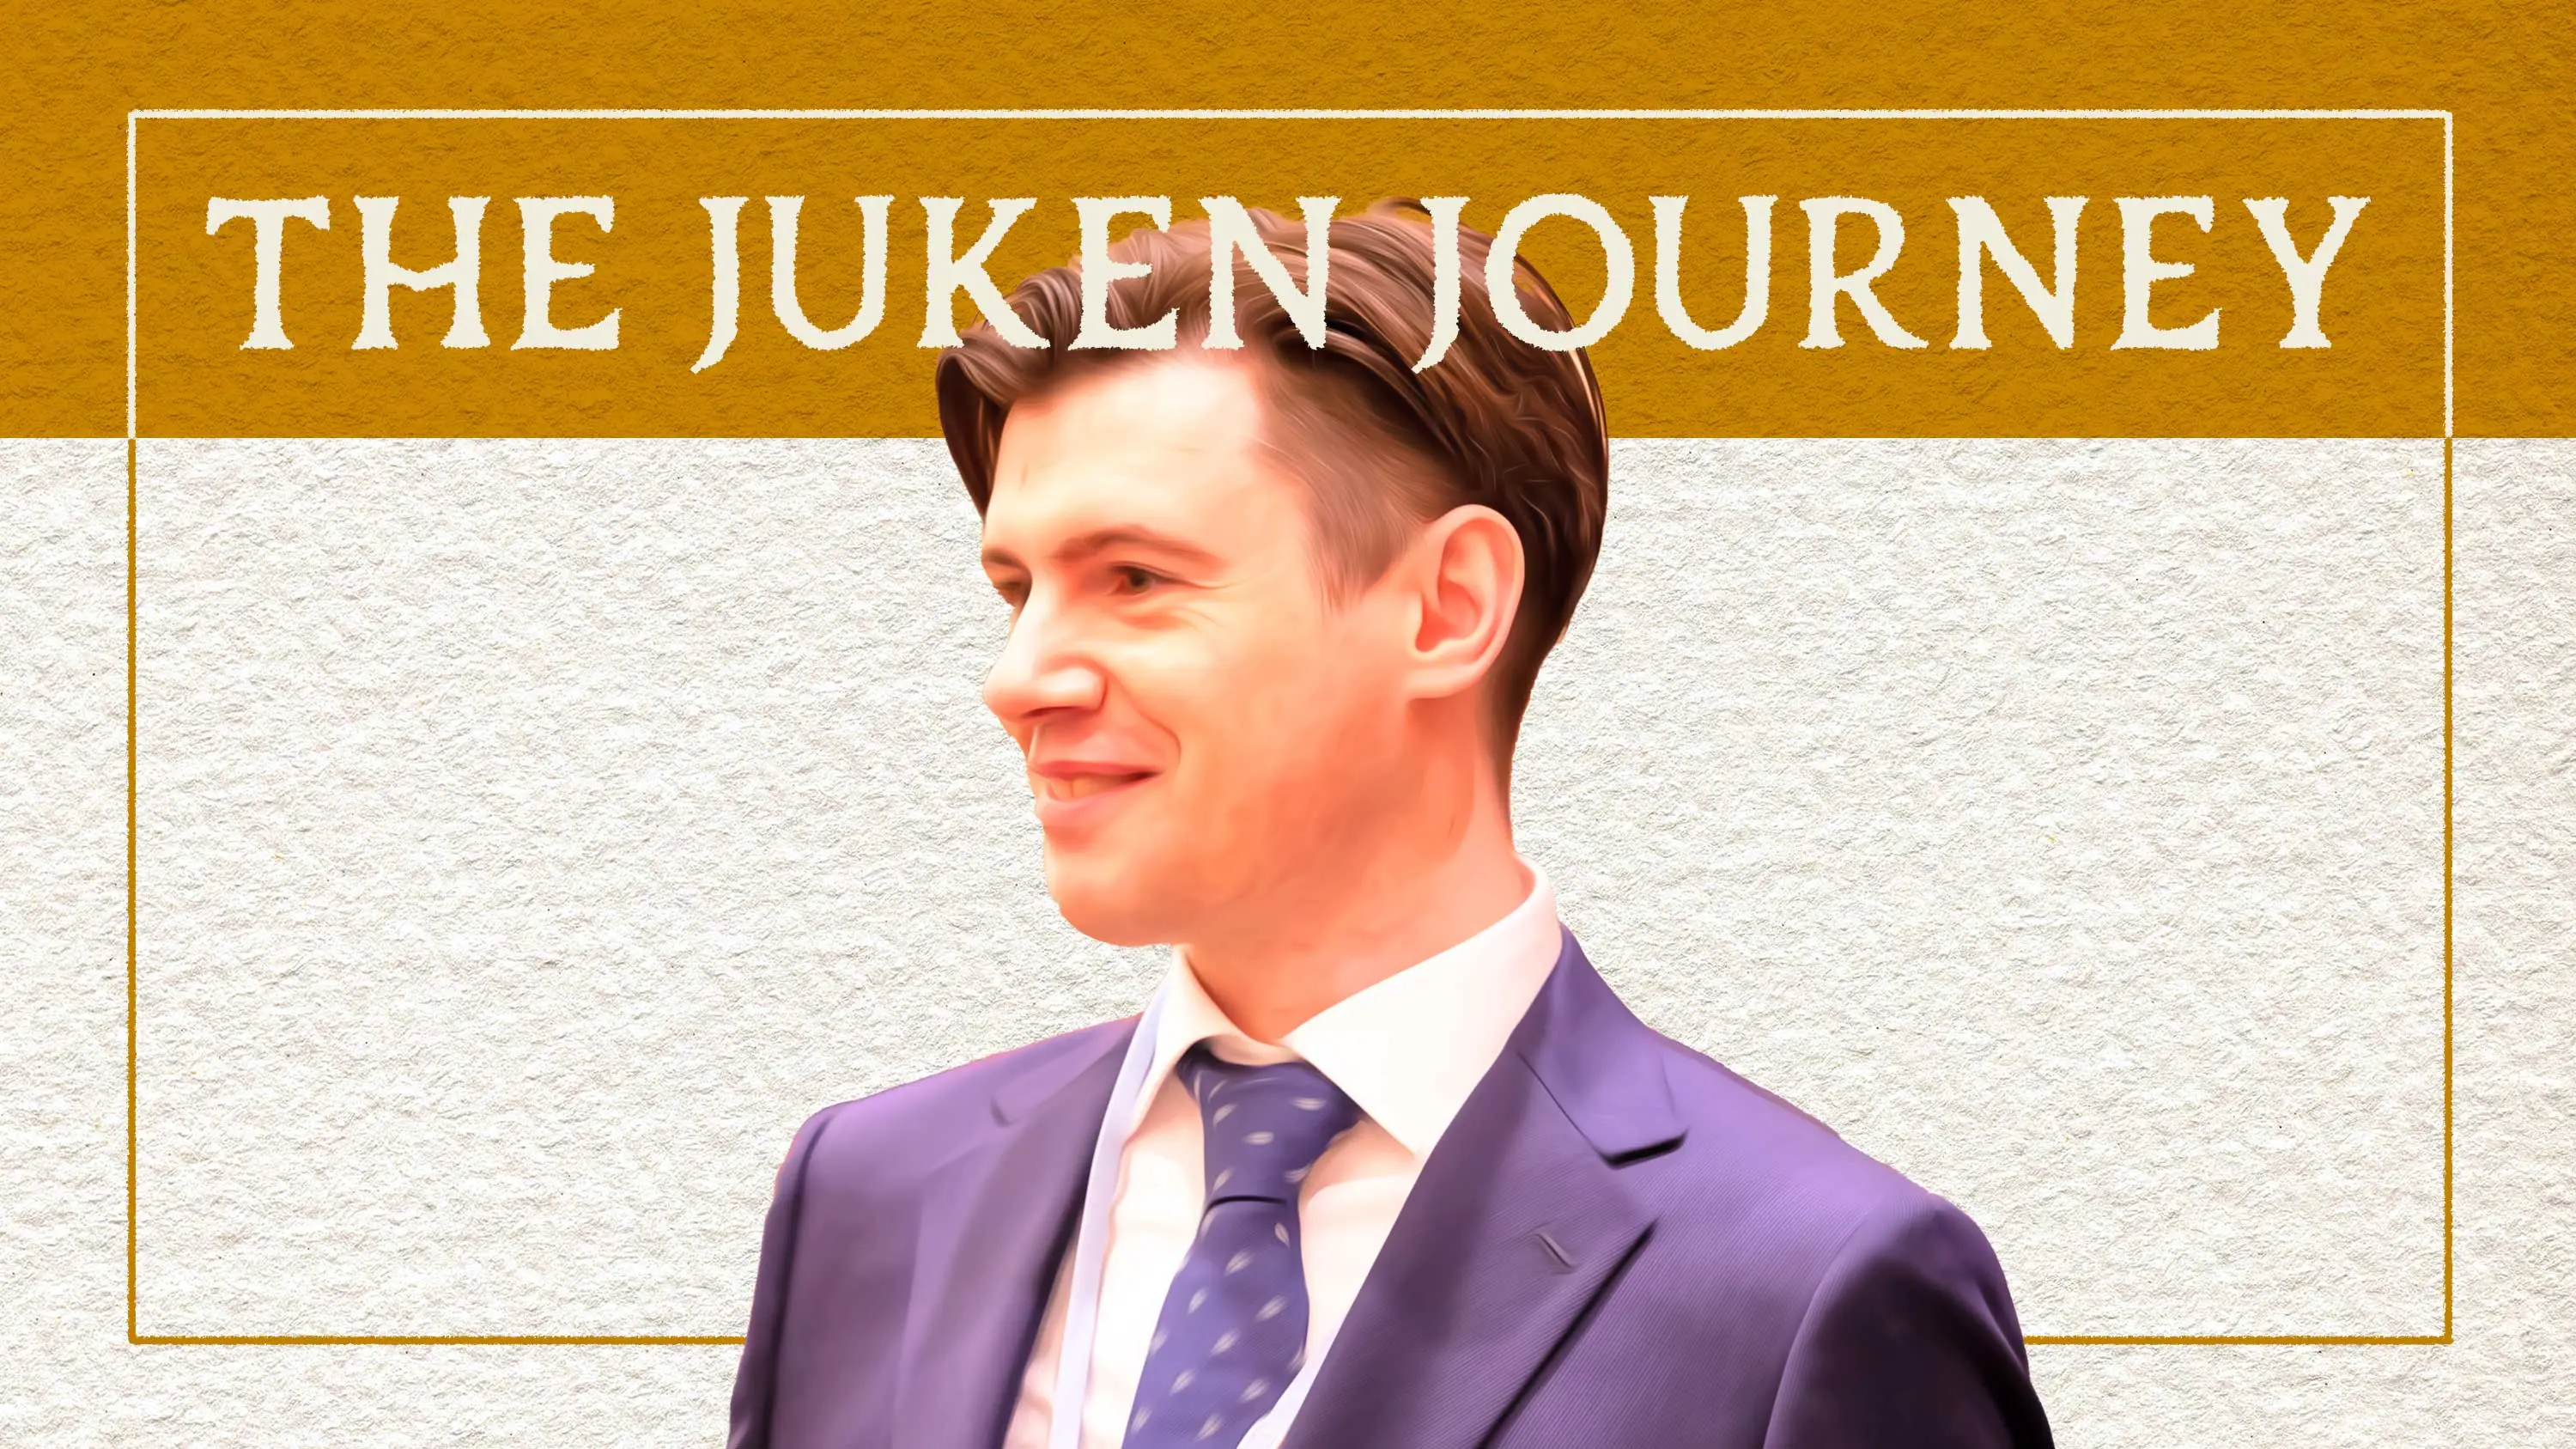 The Juken Journey: Charting the Course for Test Success - March 2024